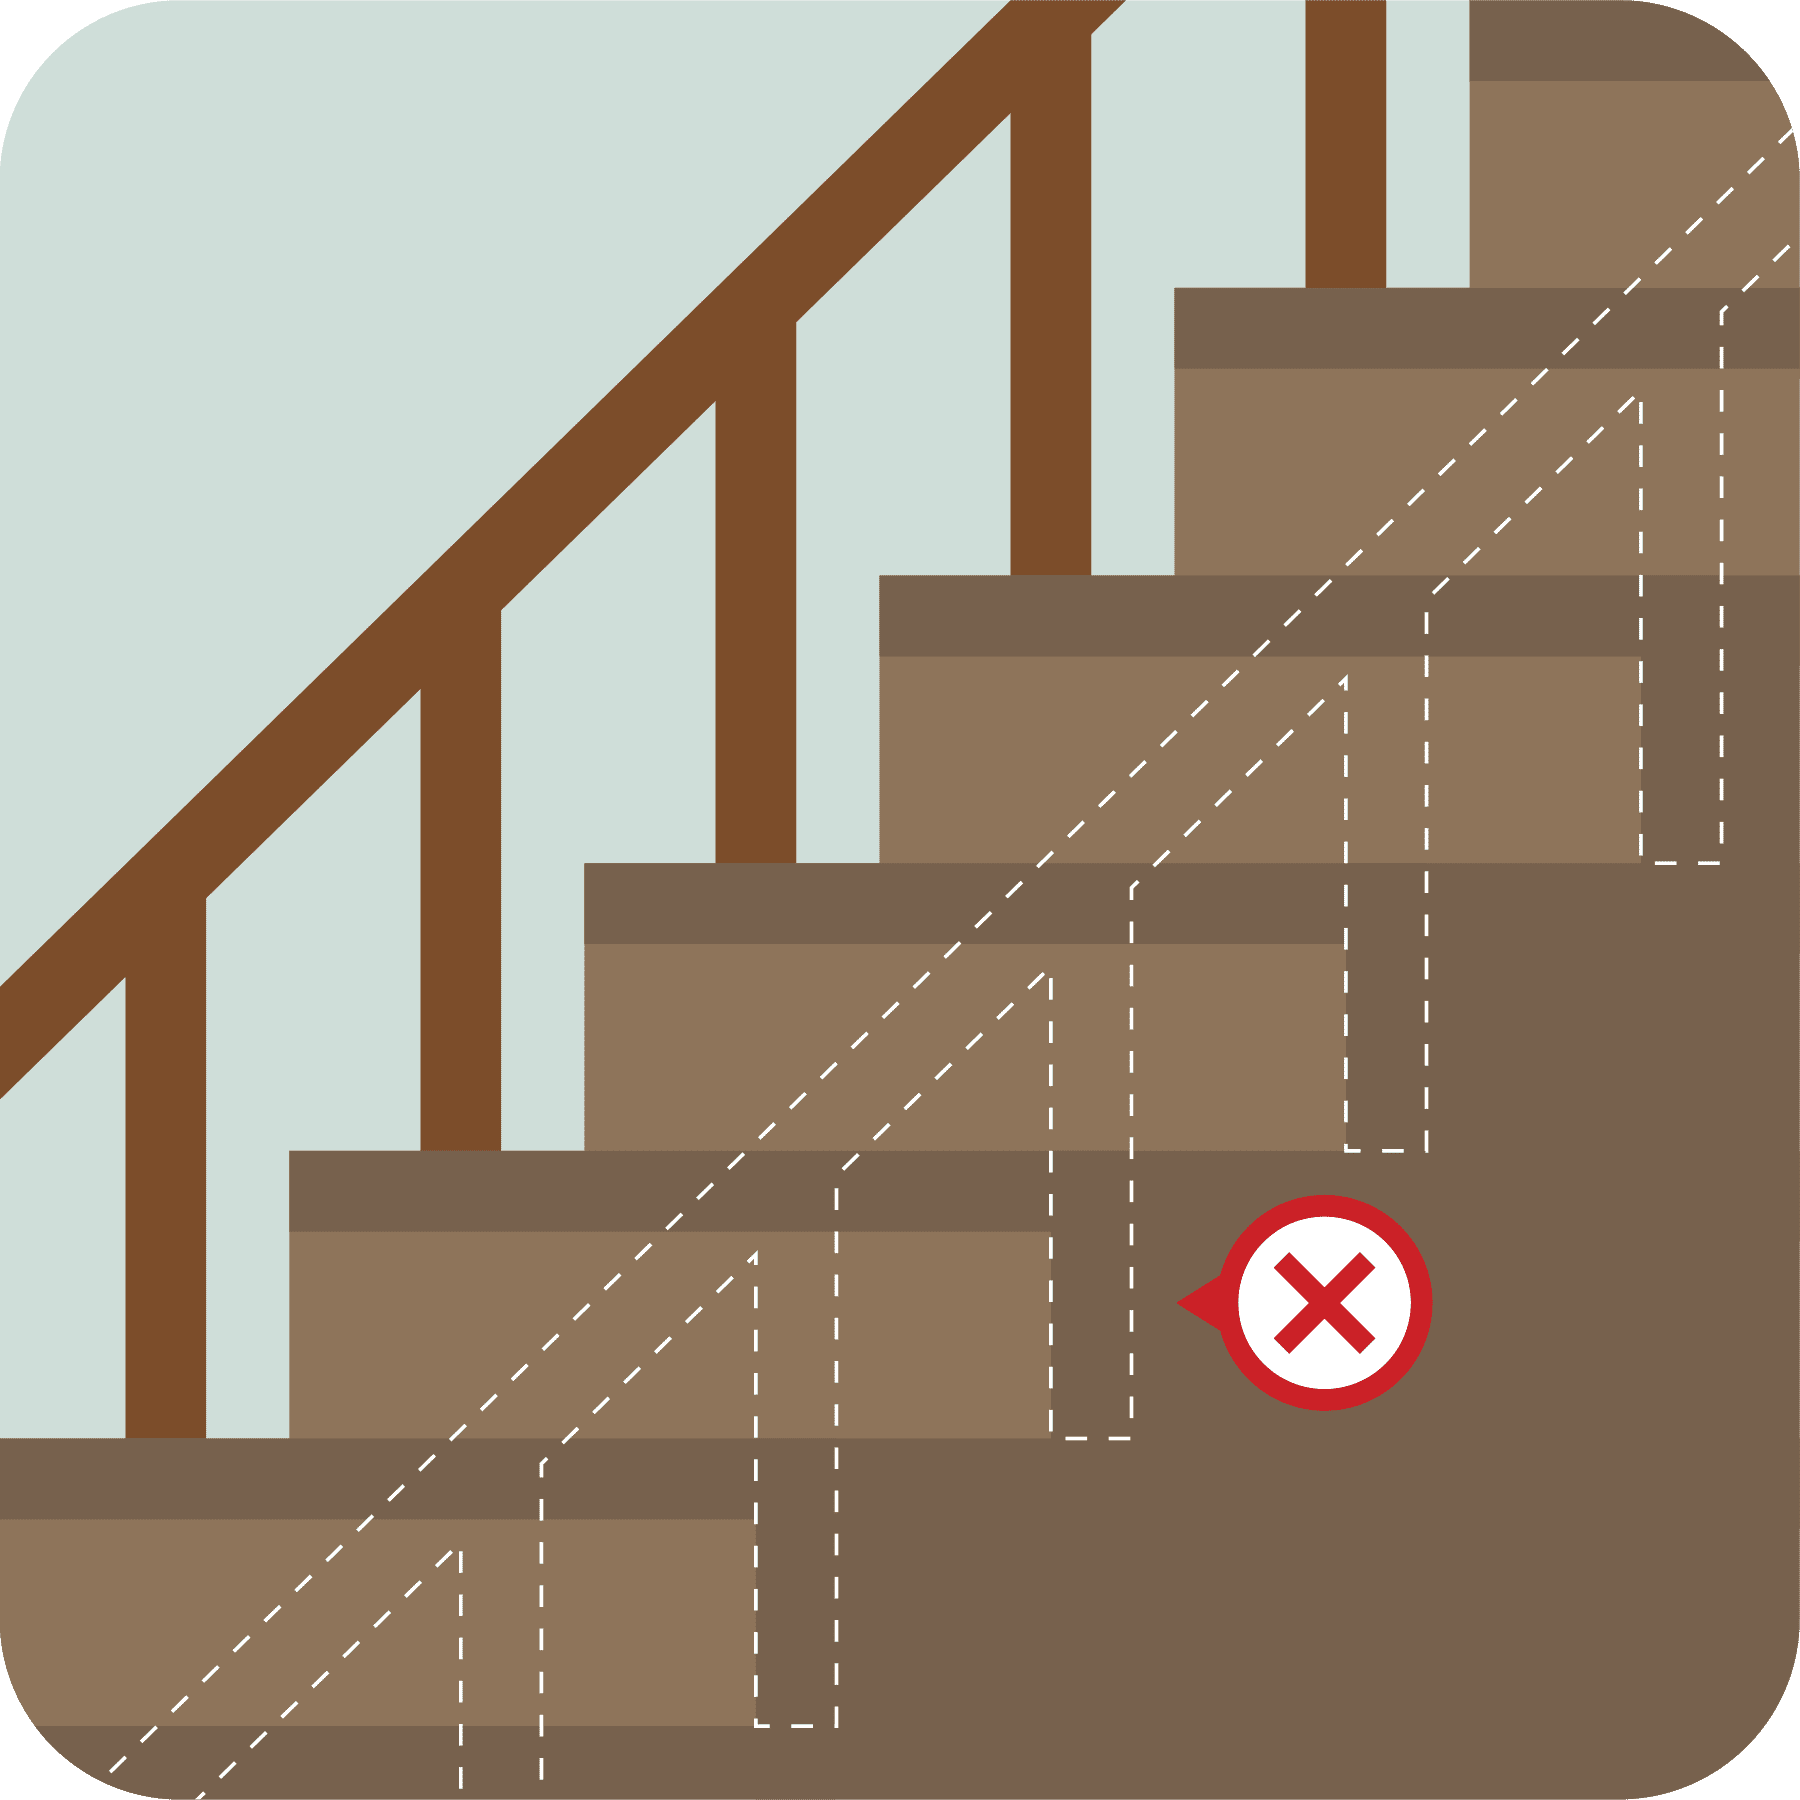 A stairway with handrails on one side. A red x is shown.